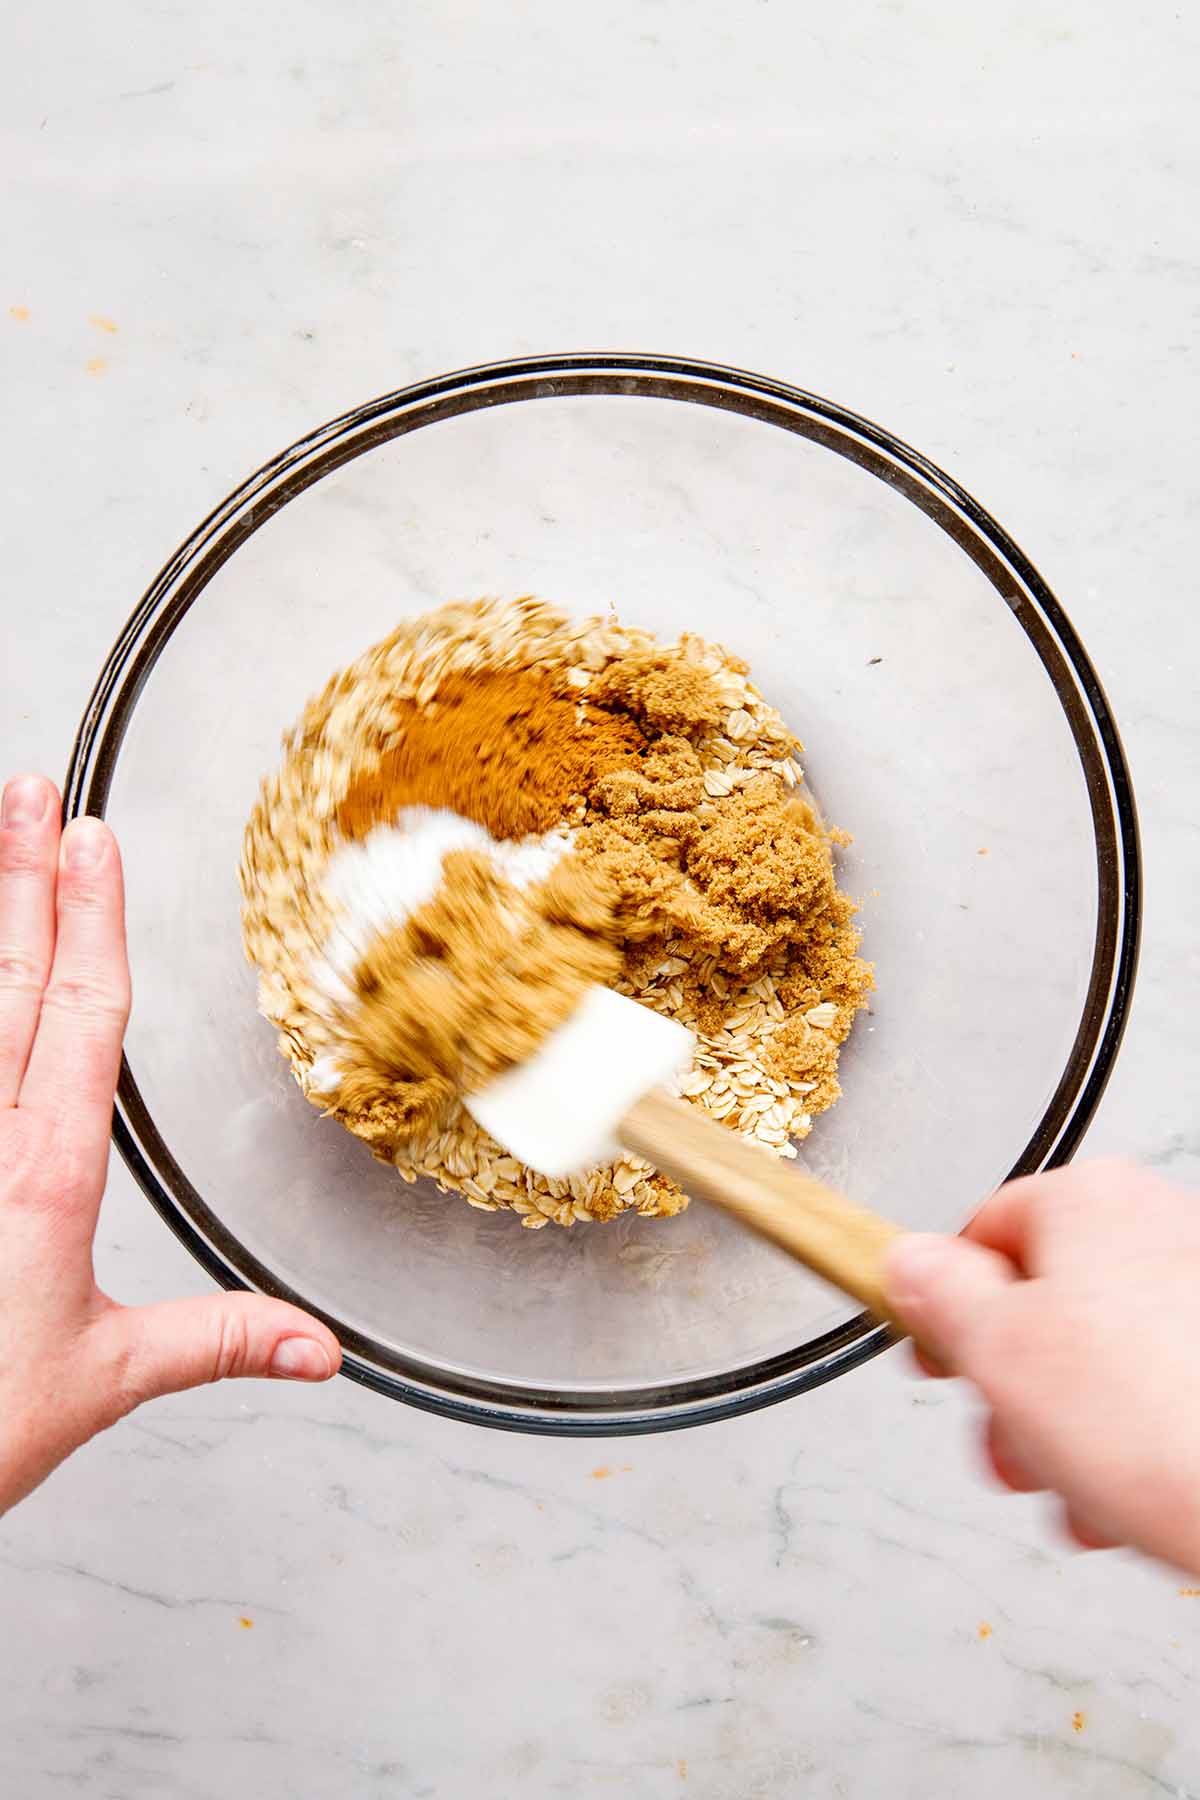 A hand using a rubber spatula to mix dry ingredients in a bowl.